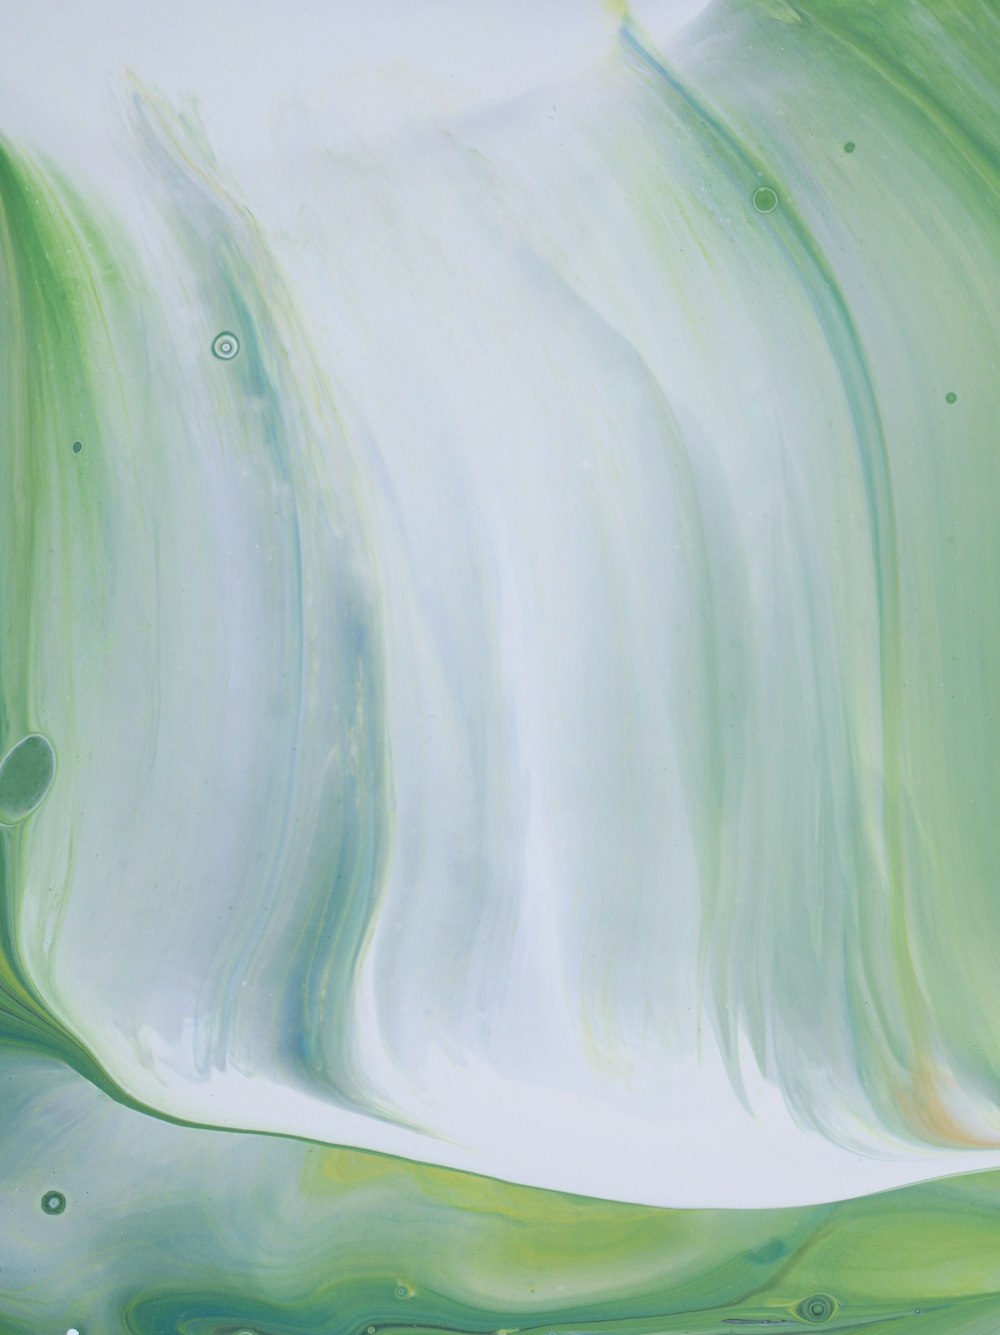 a painting of green and white swirls on a white background